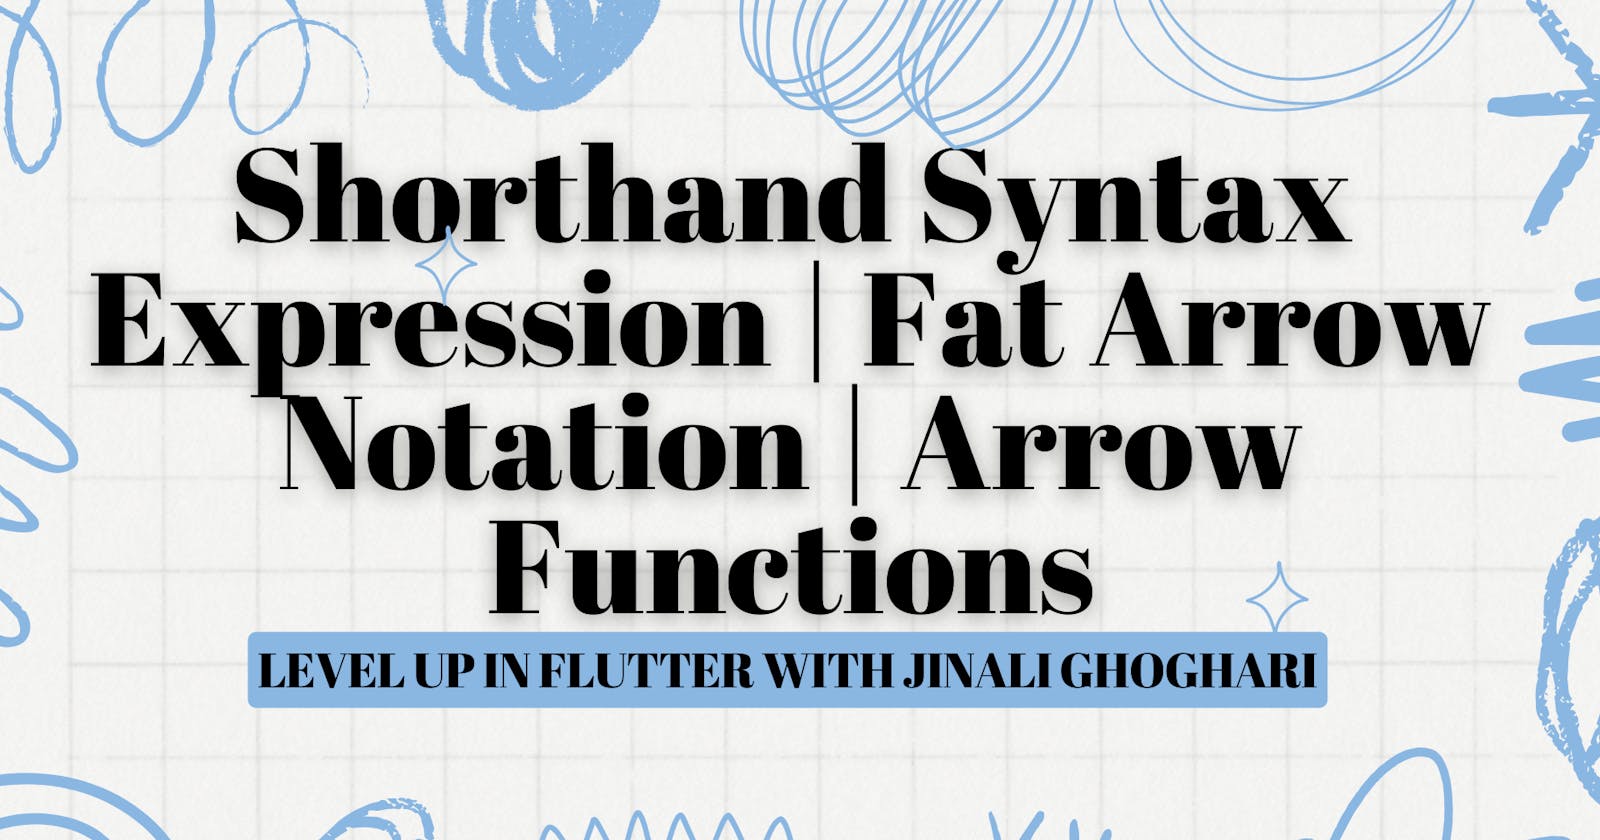 Shorthand Syntax Expression | Fat Arrow Notation | Arrow Functions